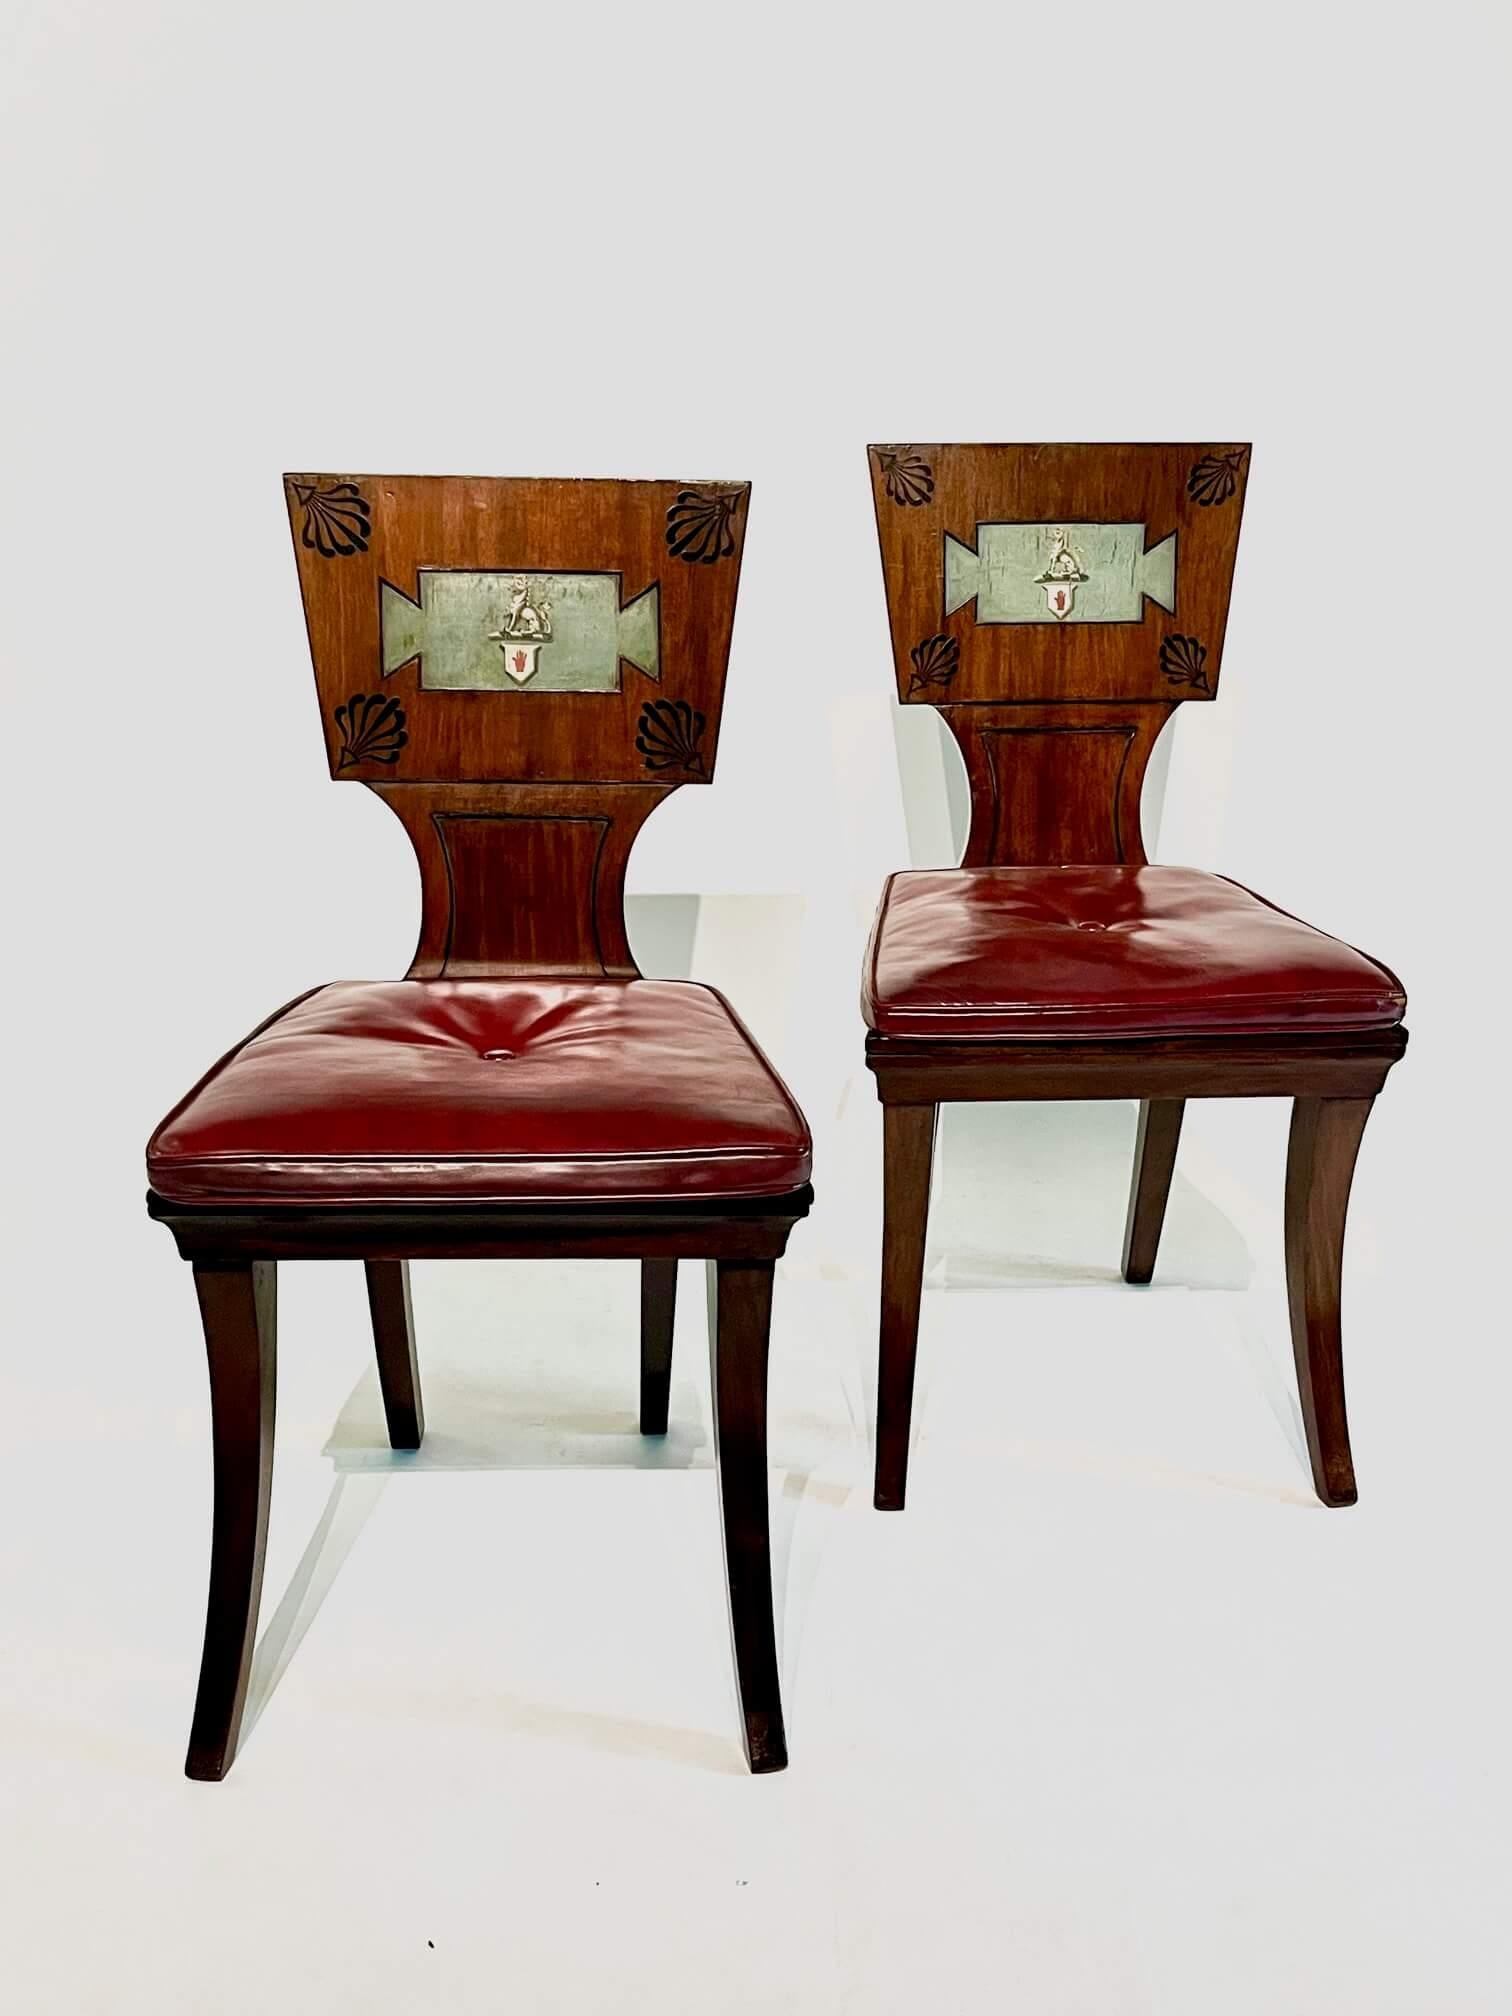 Hand-Carved English Regency Armorial Hall Chairs Attributed to Marsh & Tatham, circa 1805